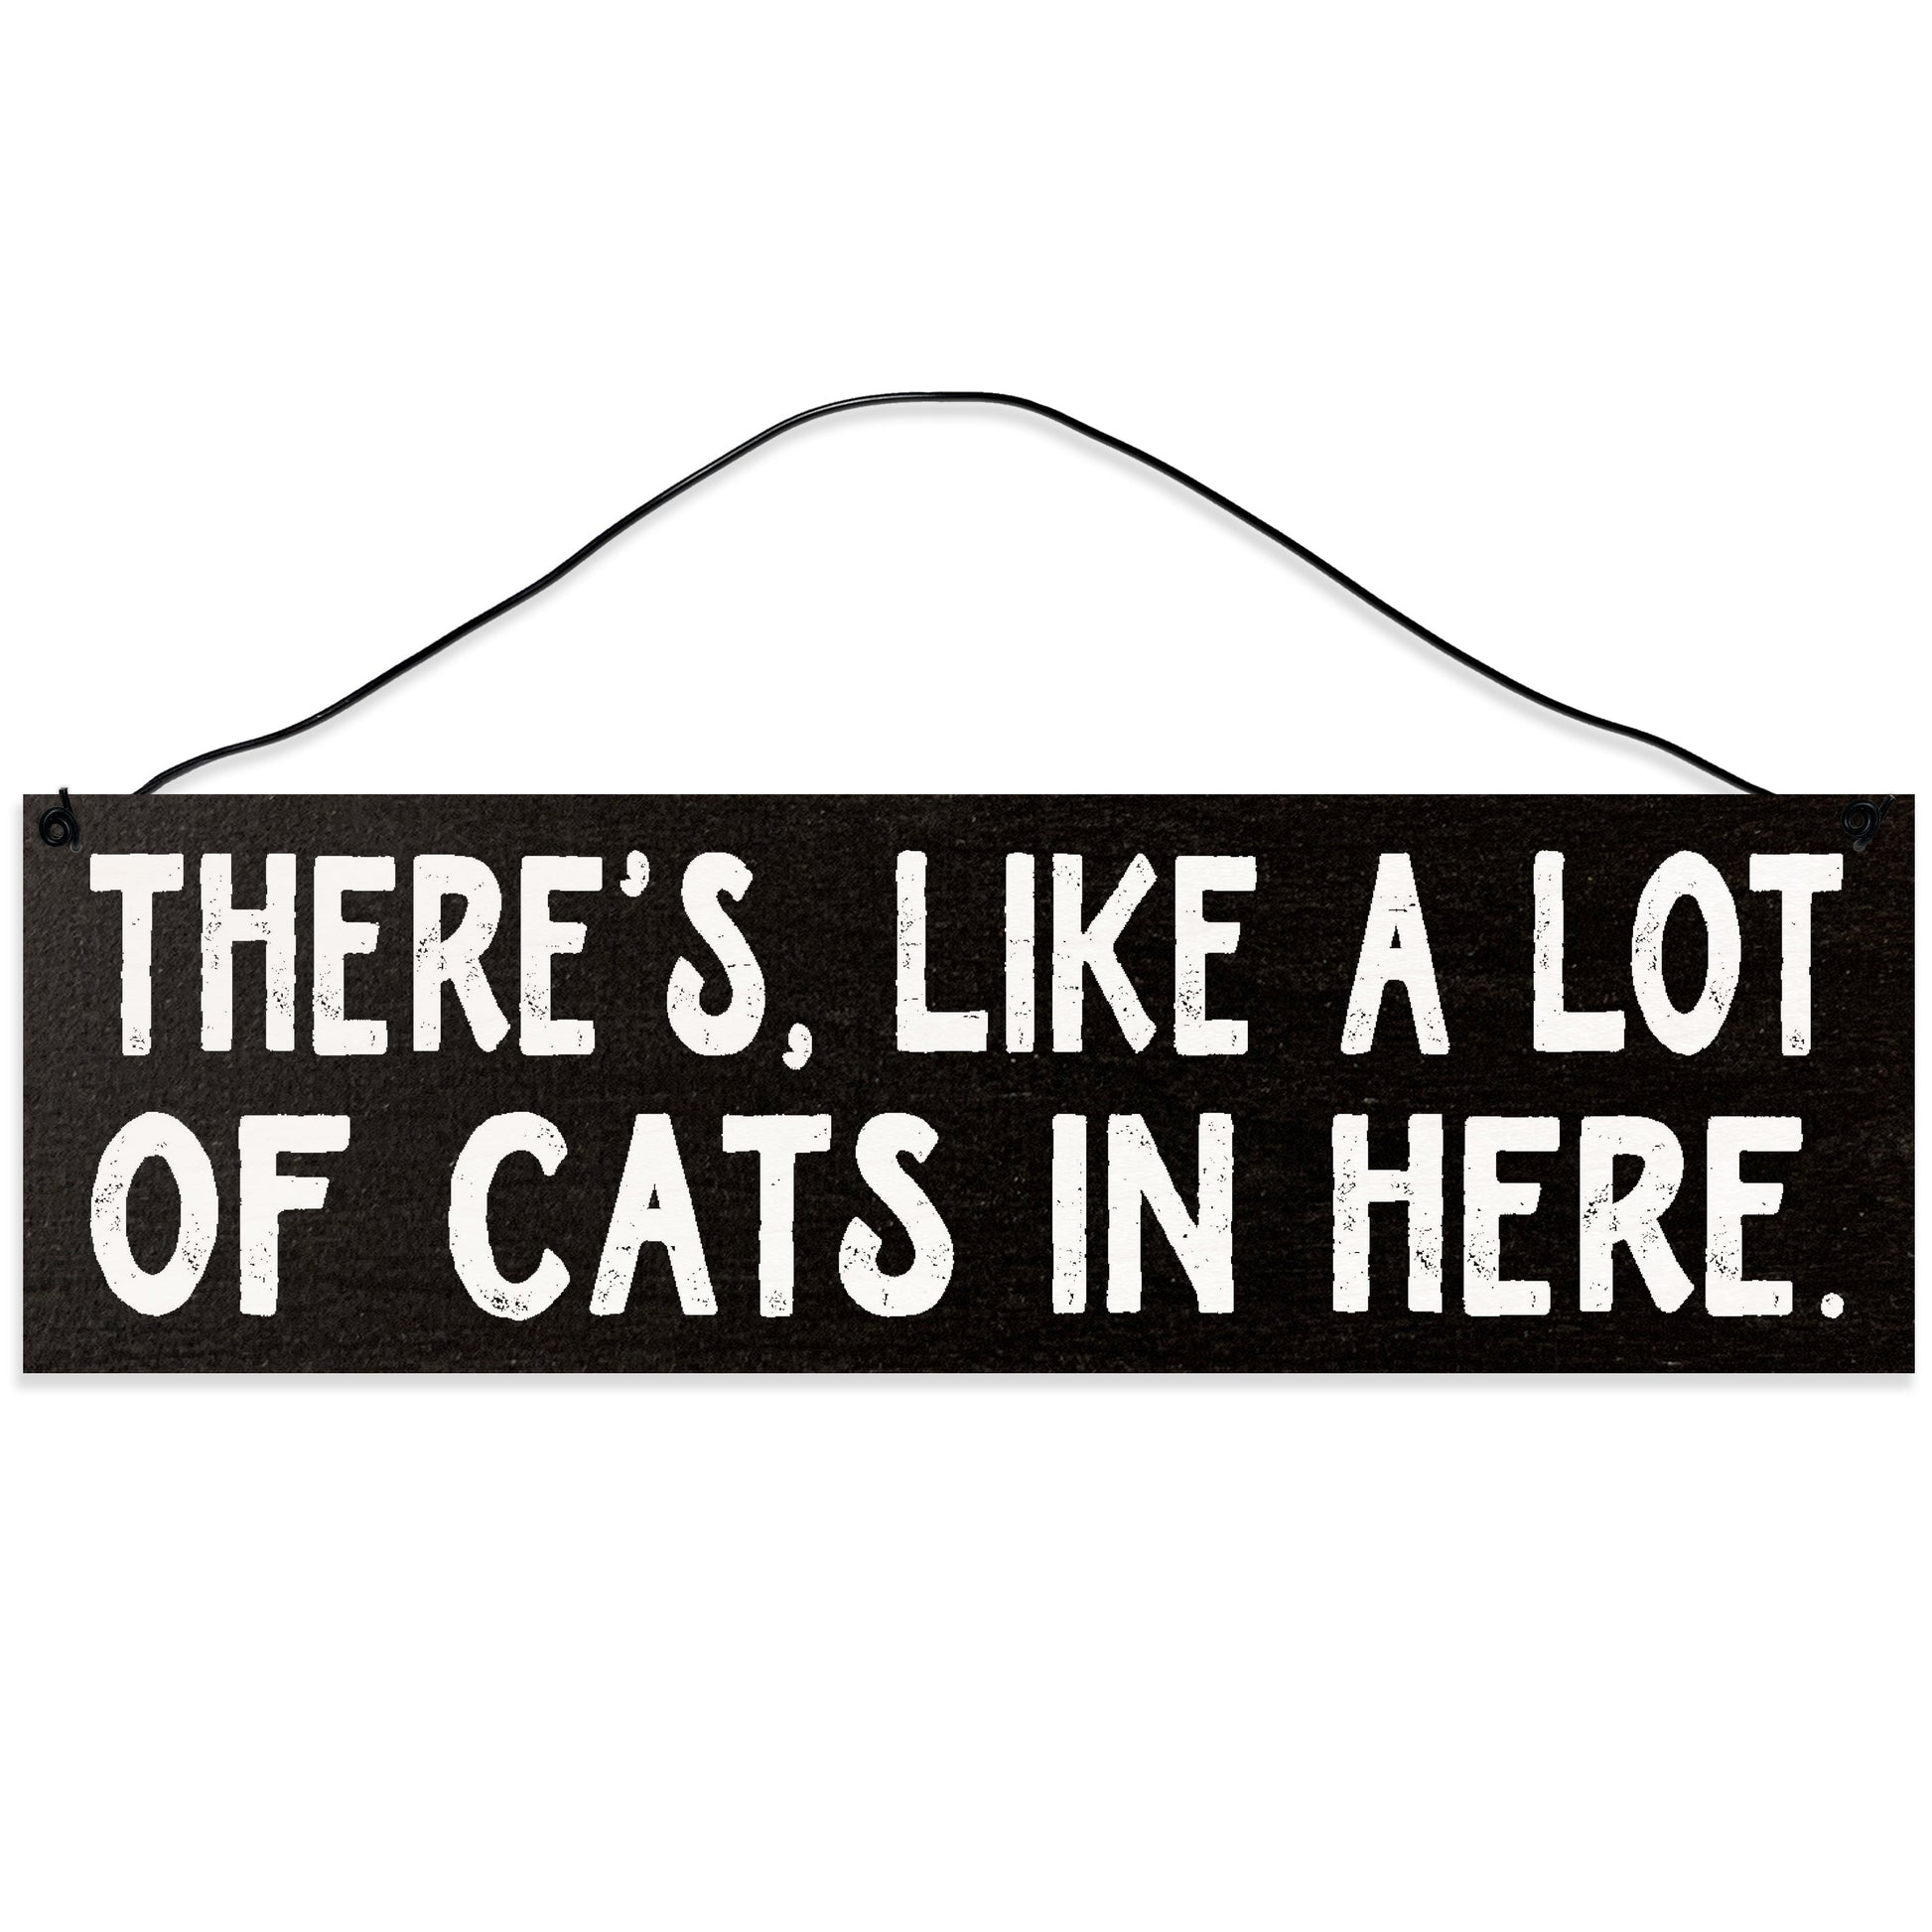 Sawyer's Mill - There's Like a Lot of Cats in Here. Wood Sign for Home or Office. Measures 3x10 inches.